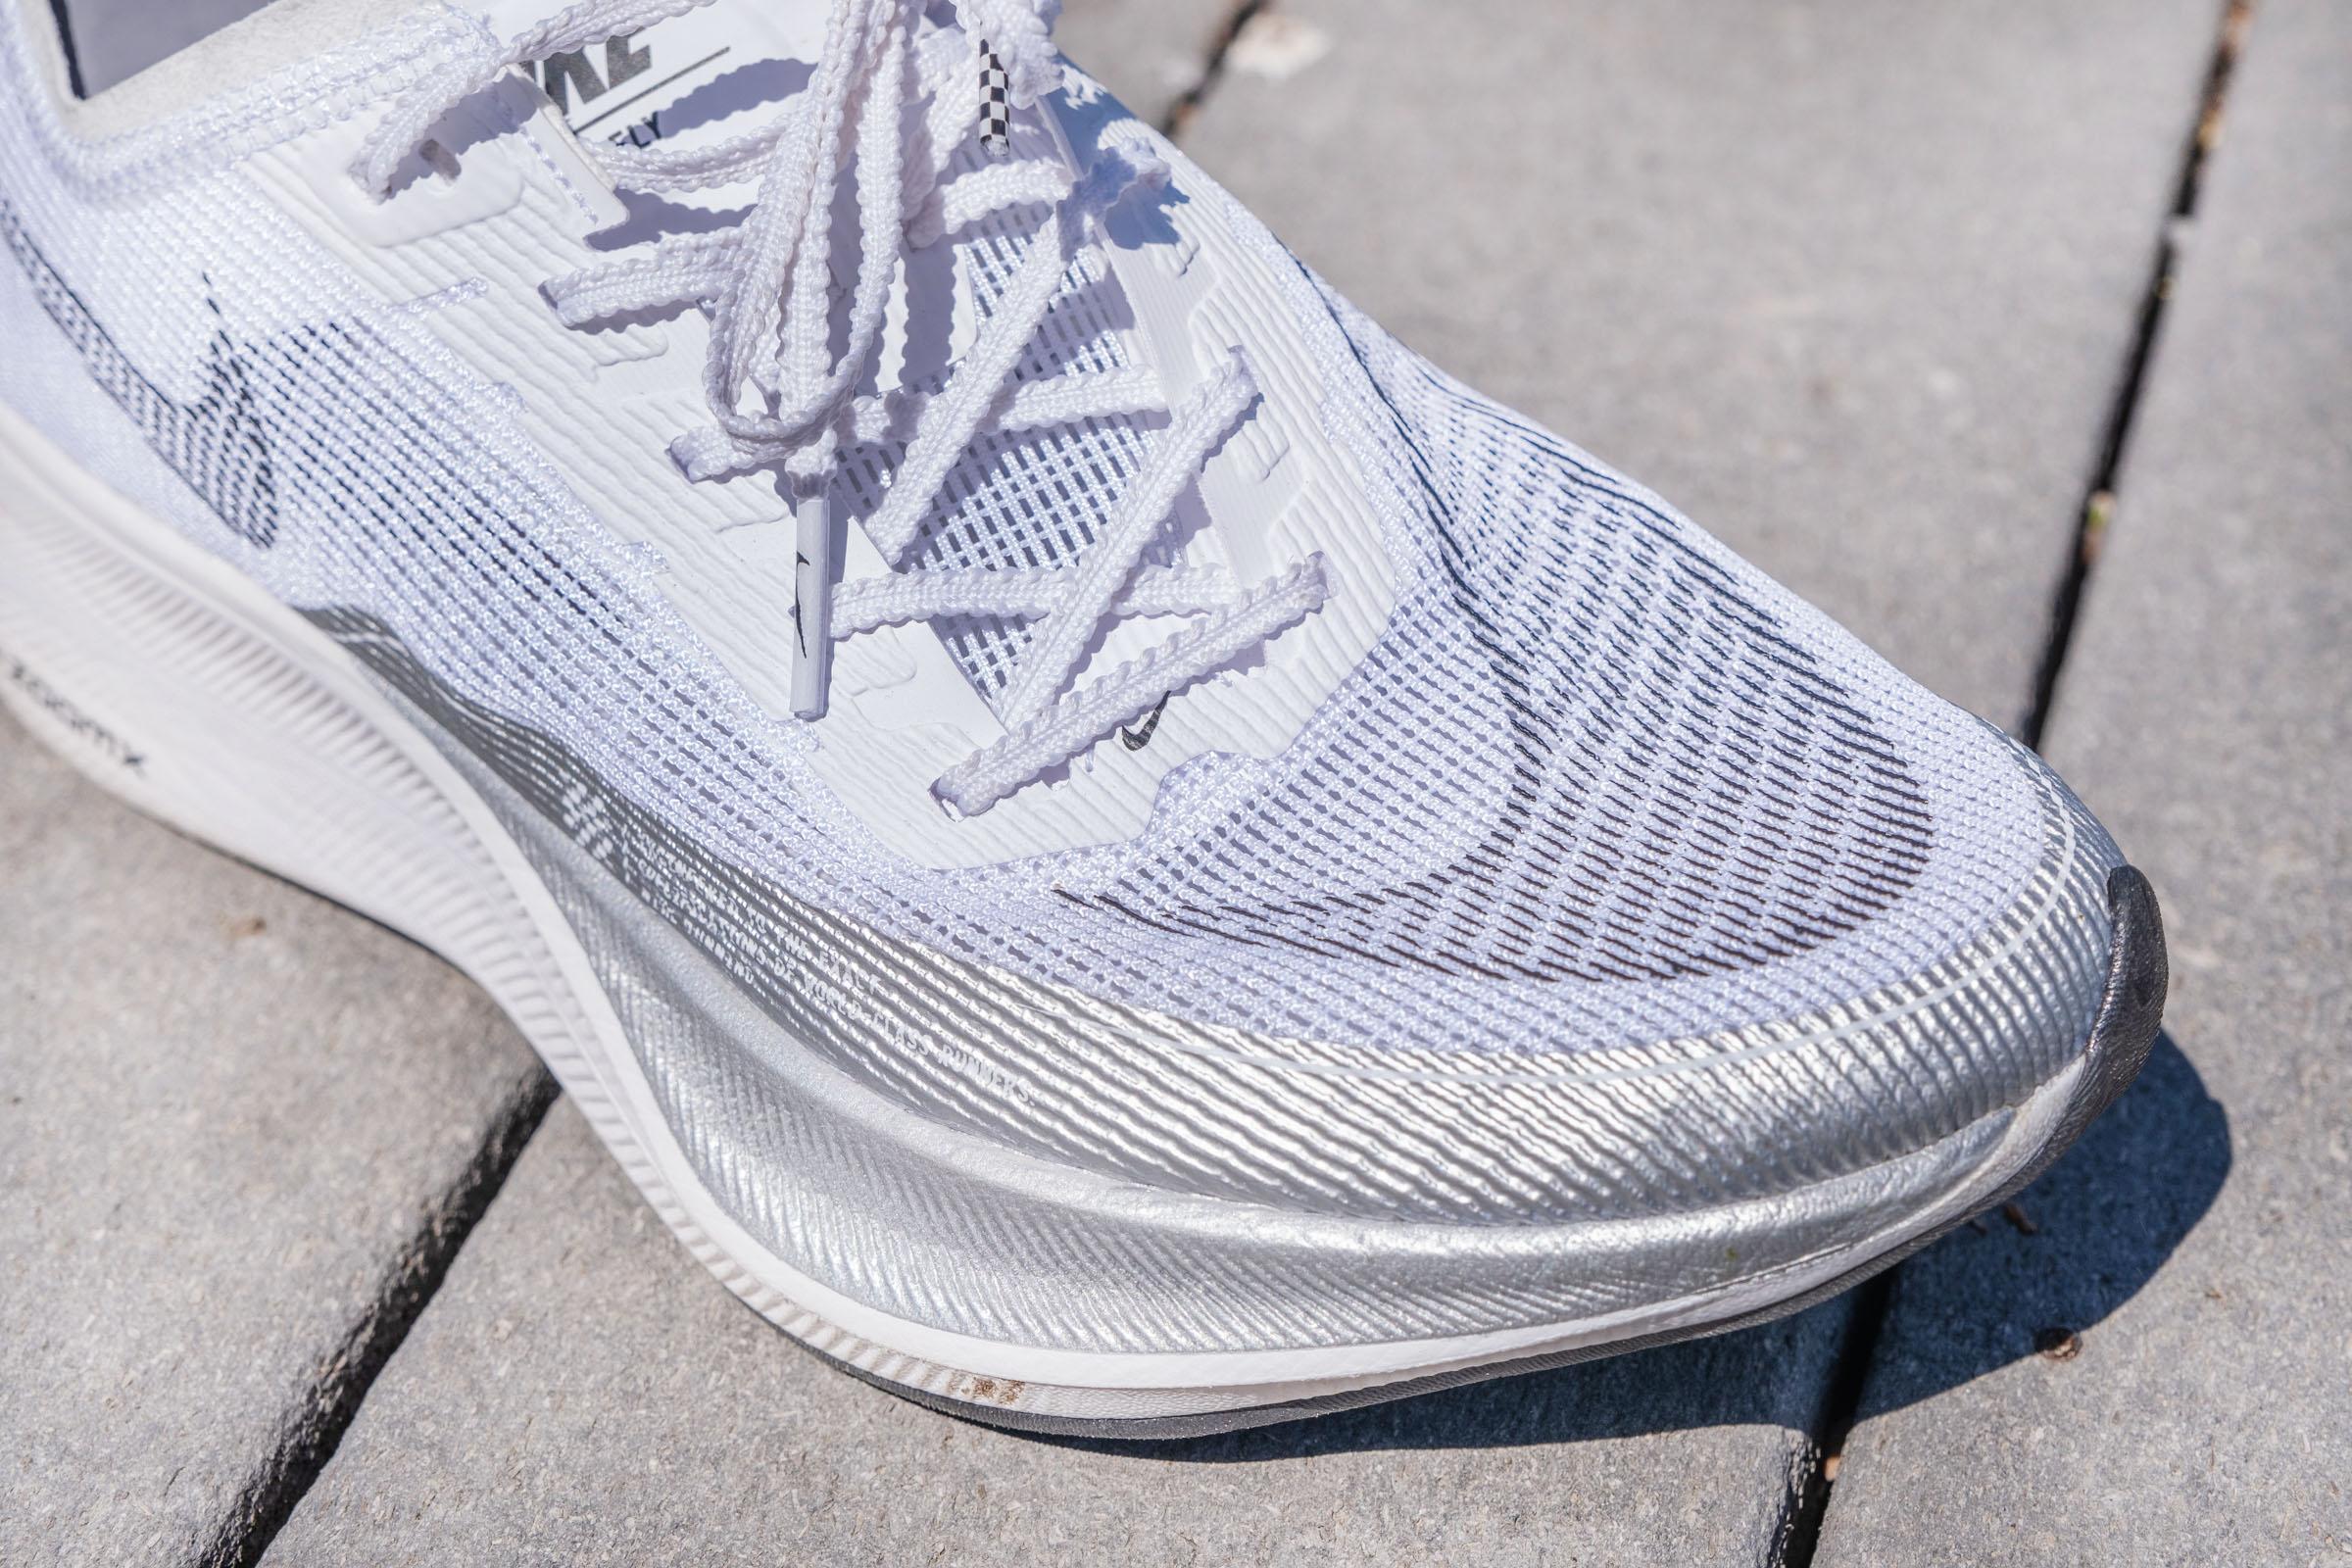 Cut in half: Nike ZoomX Vaporfly NEXT% 2 Review | RunRepeat